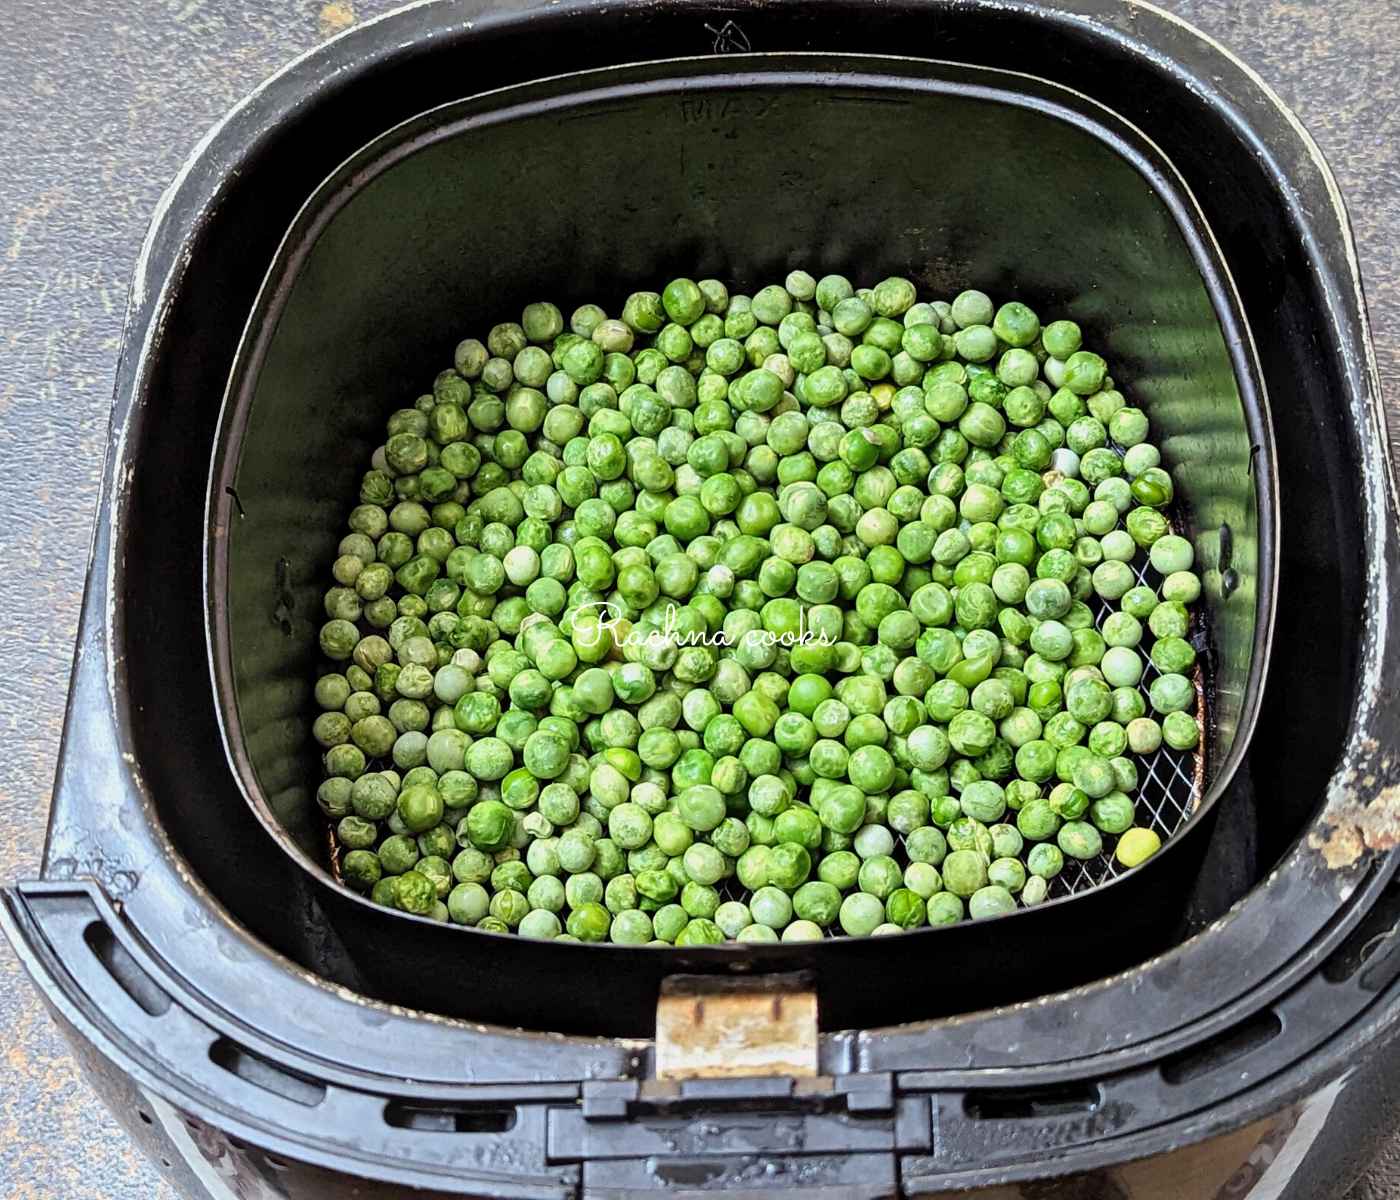 Peas in air fryer for crisping up